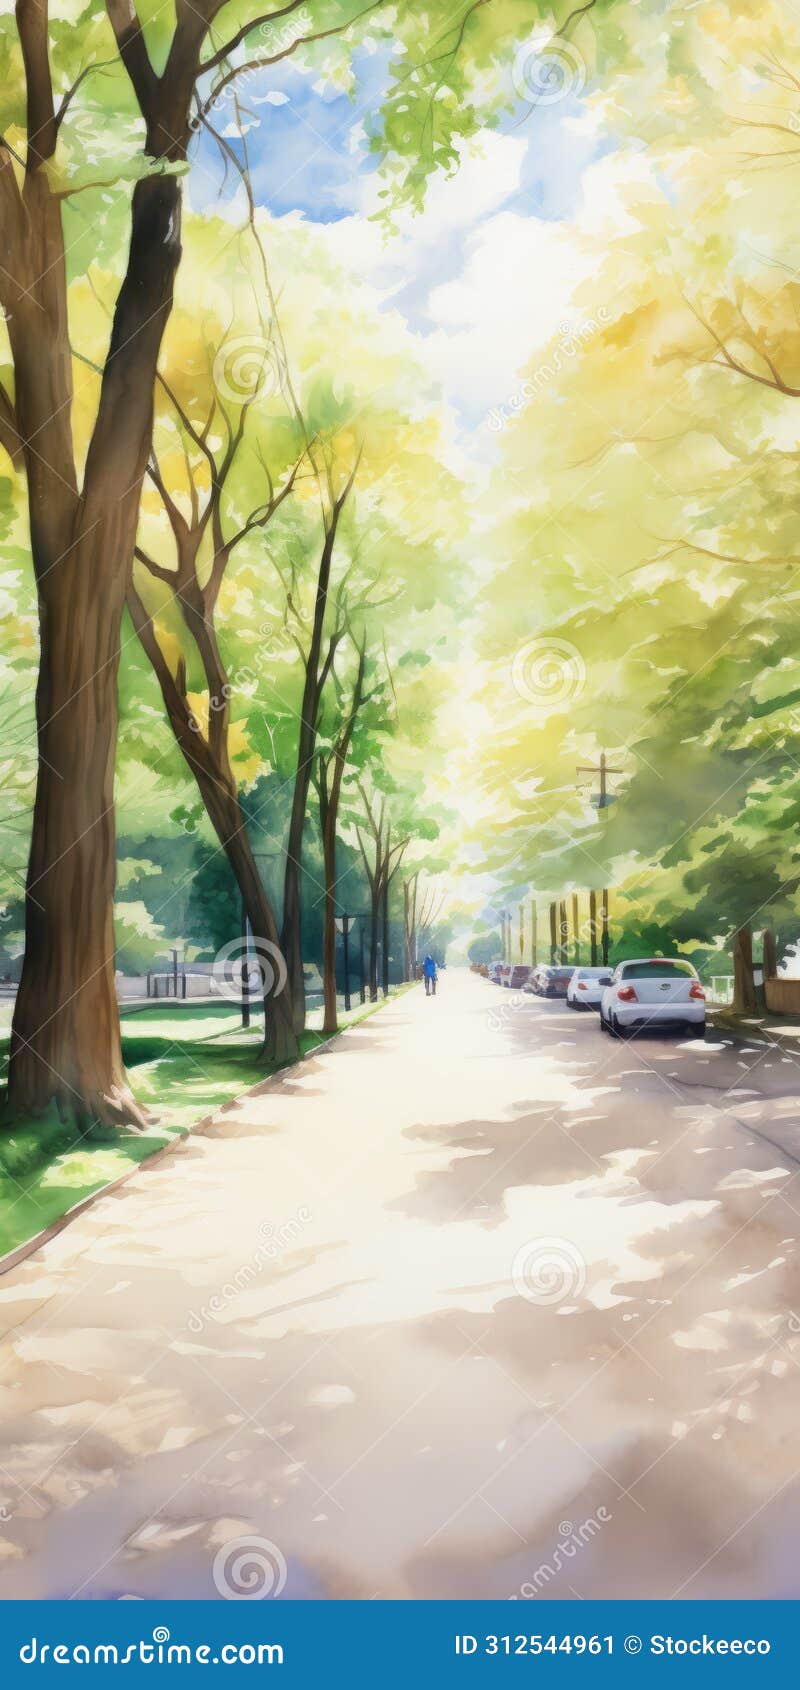 hyper realistic watercolor style image of fourteenth alley in a sunny park